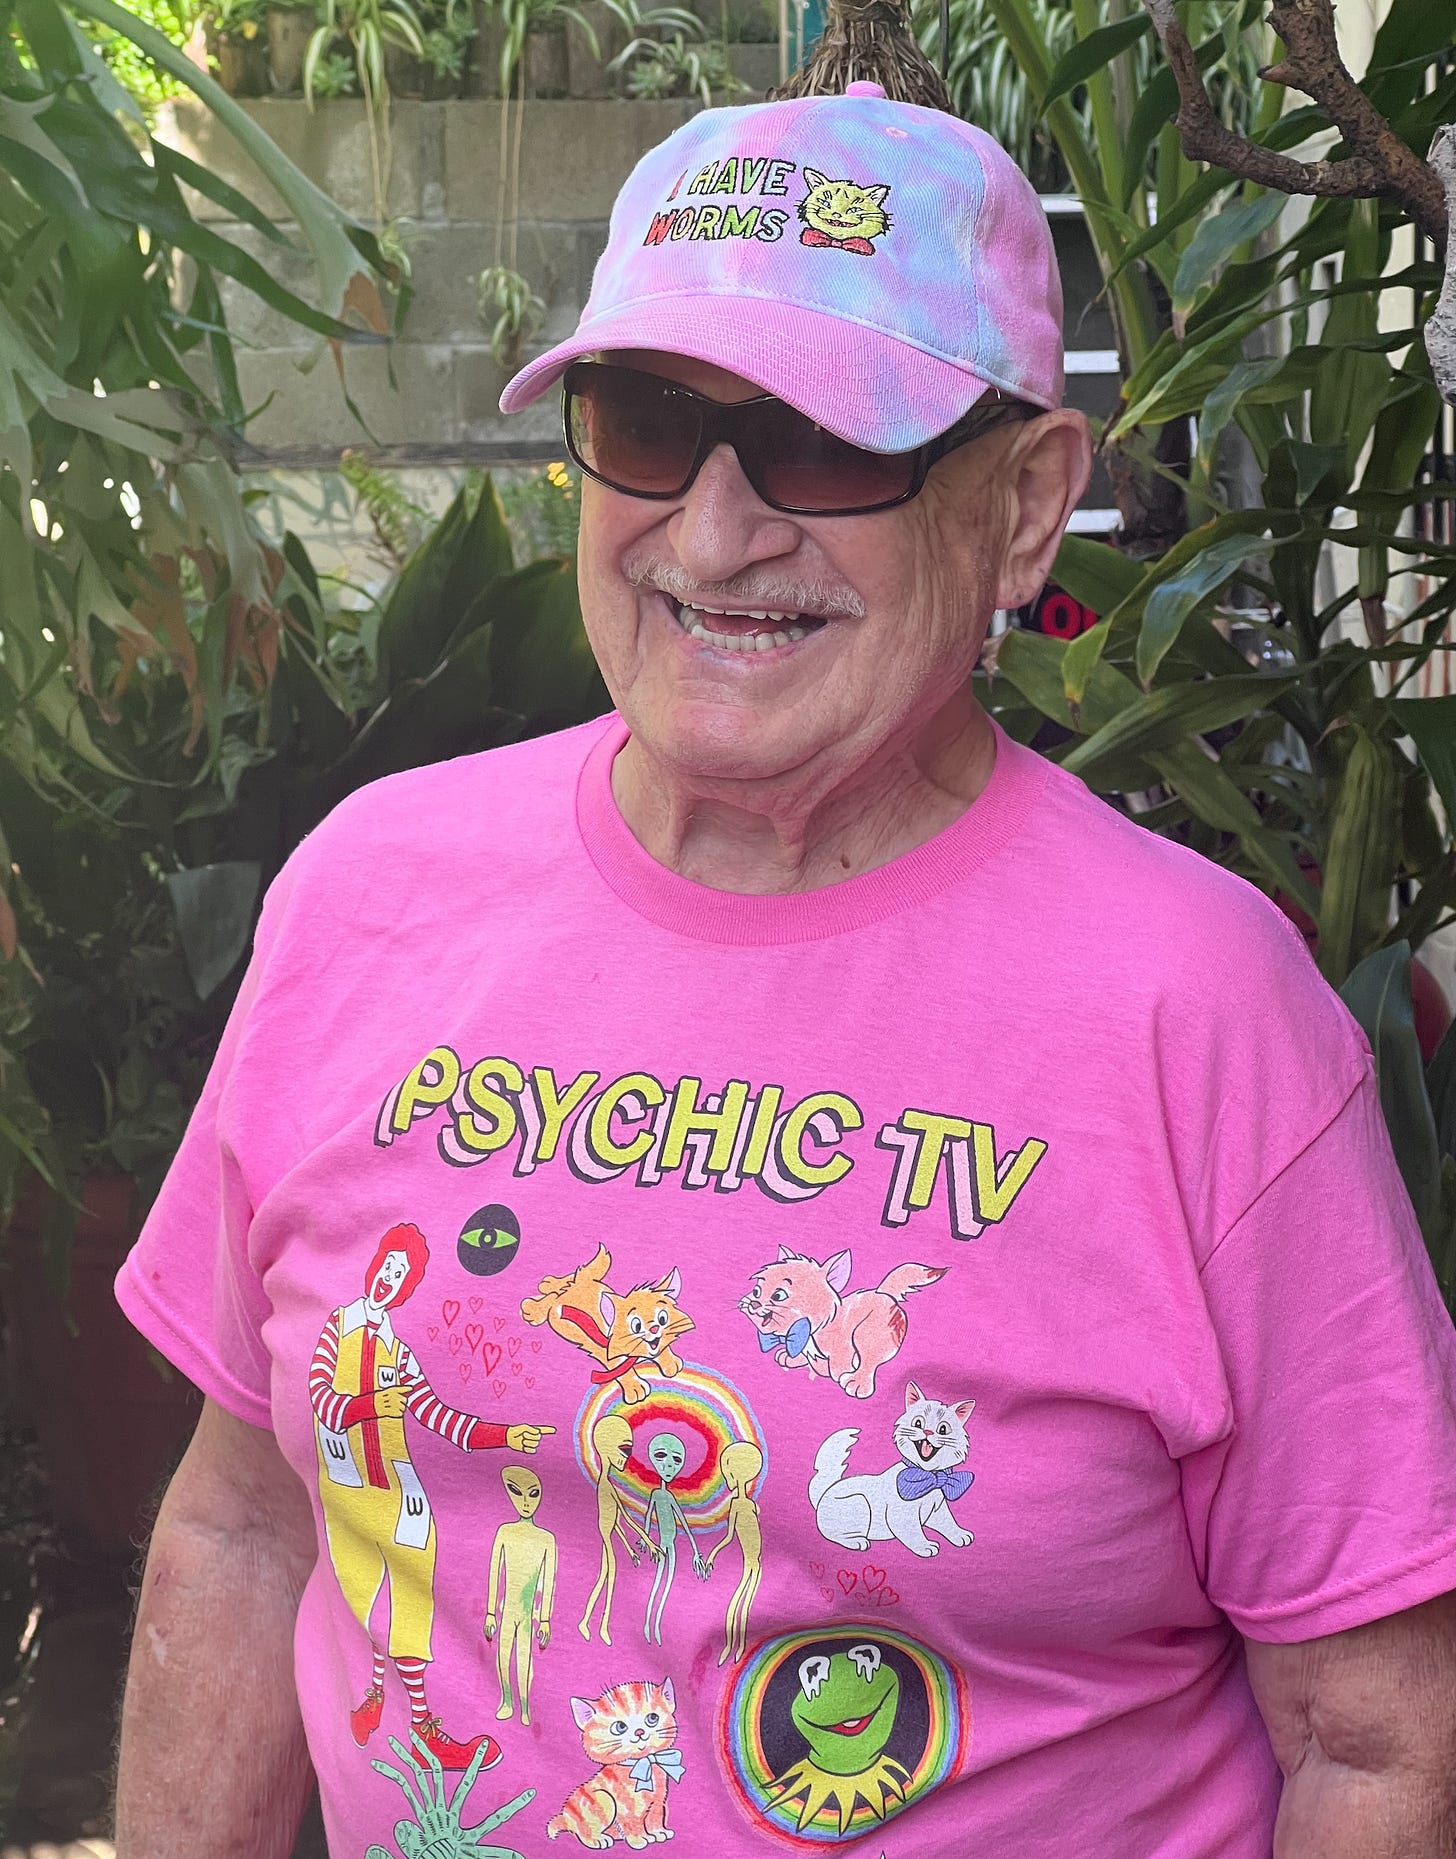 A pink tie dye hat and pink Psychic TV shirt